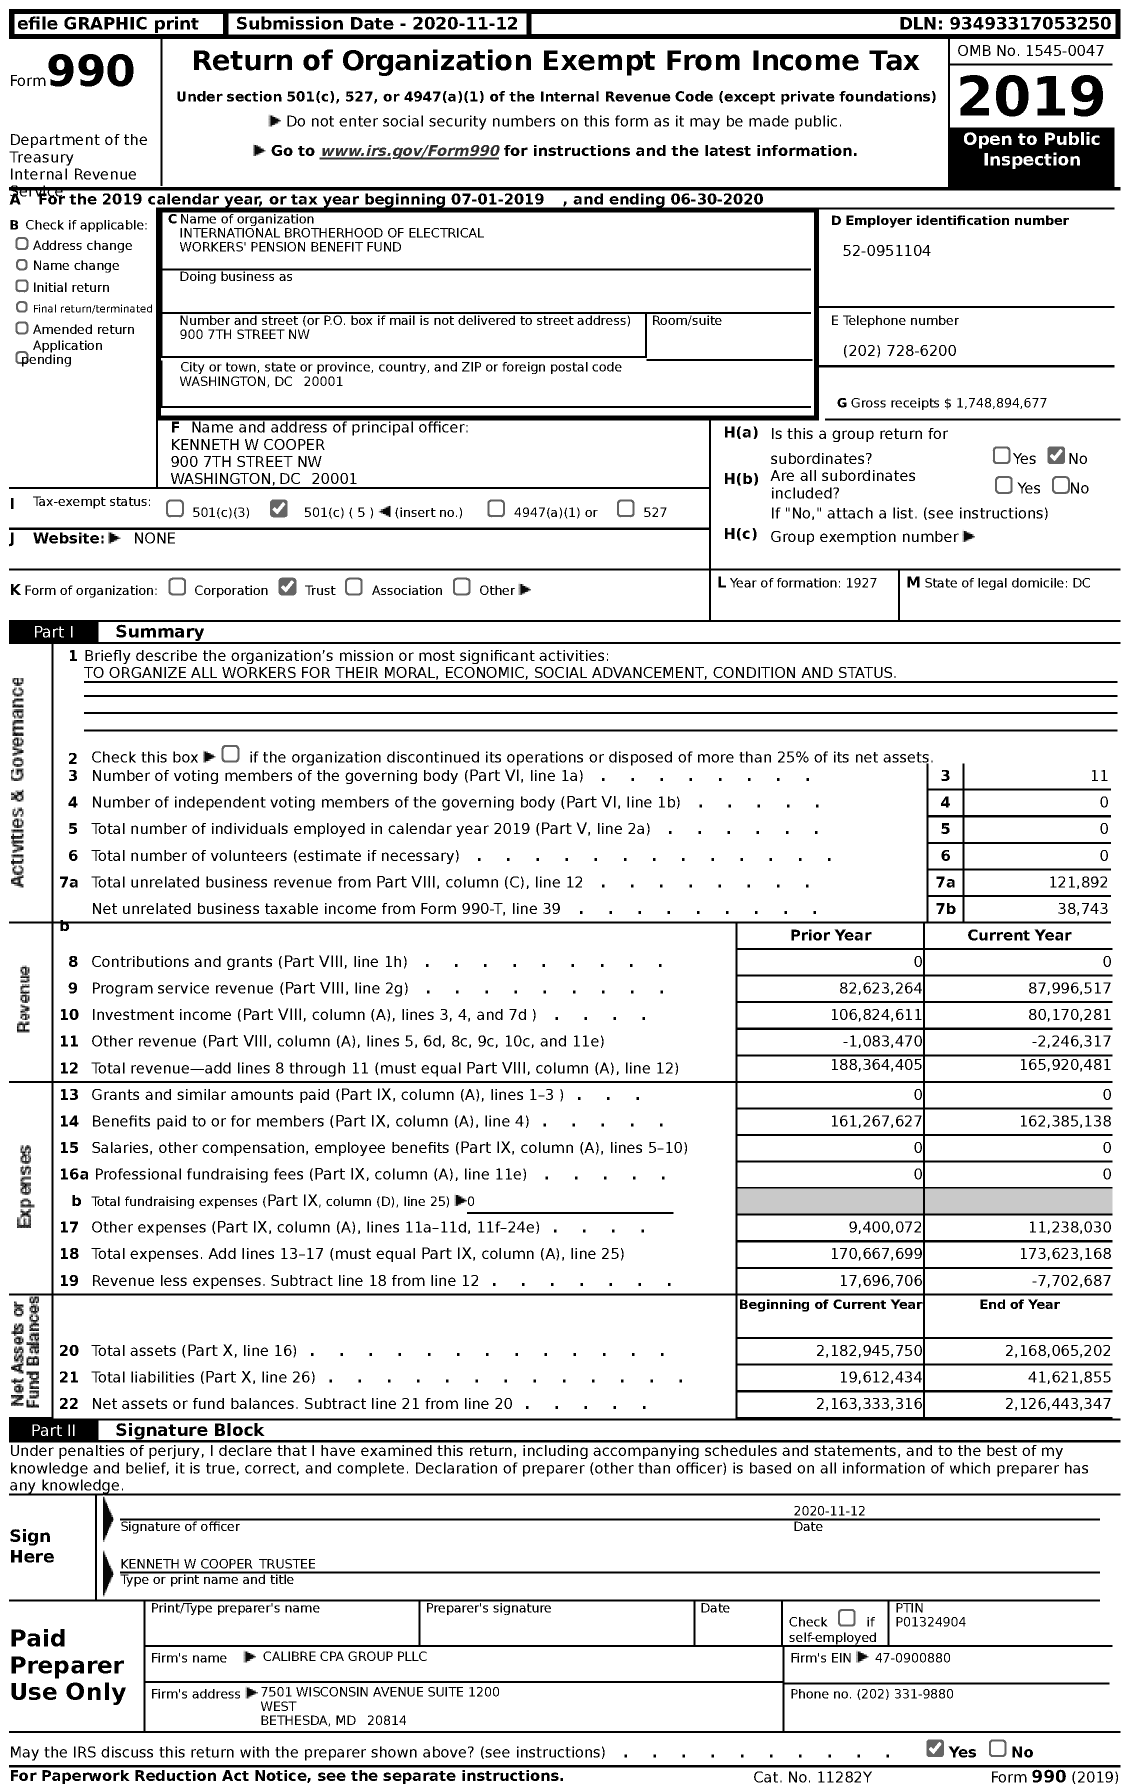 Image of first page of 2019 Form 990 for International Brotherhood of Electrical Workers Pension Benefit Fund